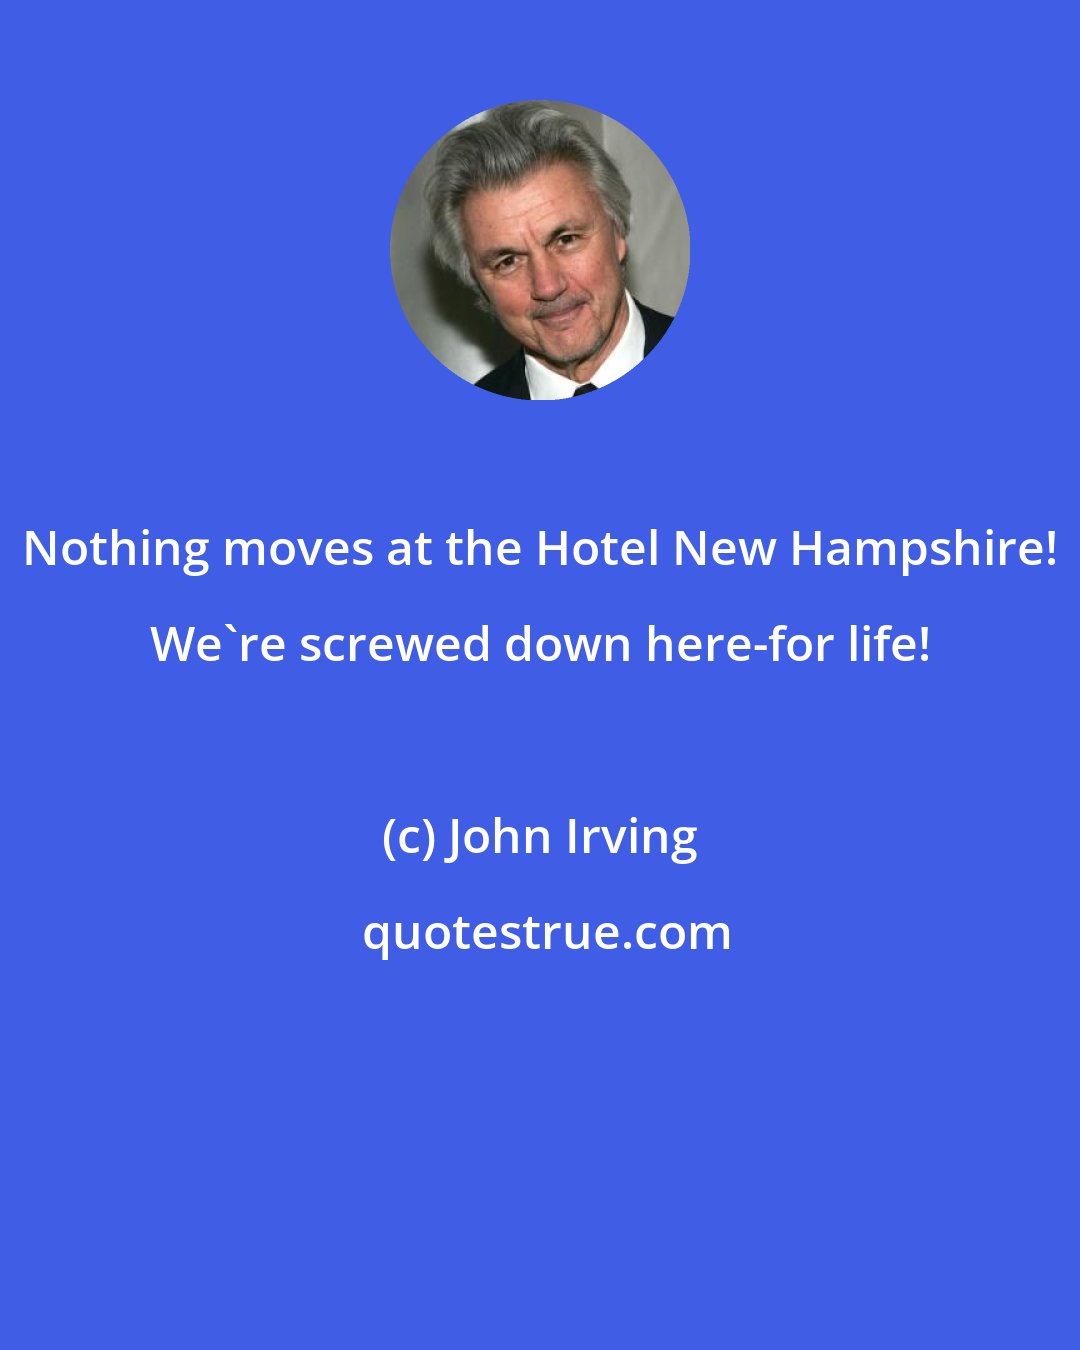 John Irving: Nothing moves at the Hotel New Hampshire! We're screwed down here-for life!